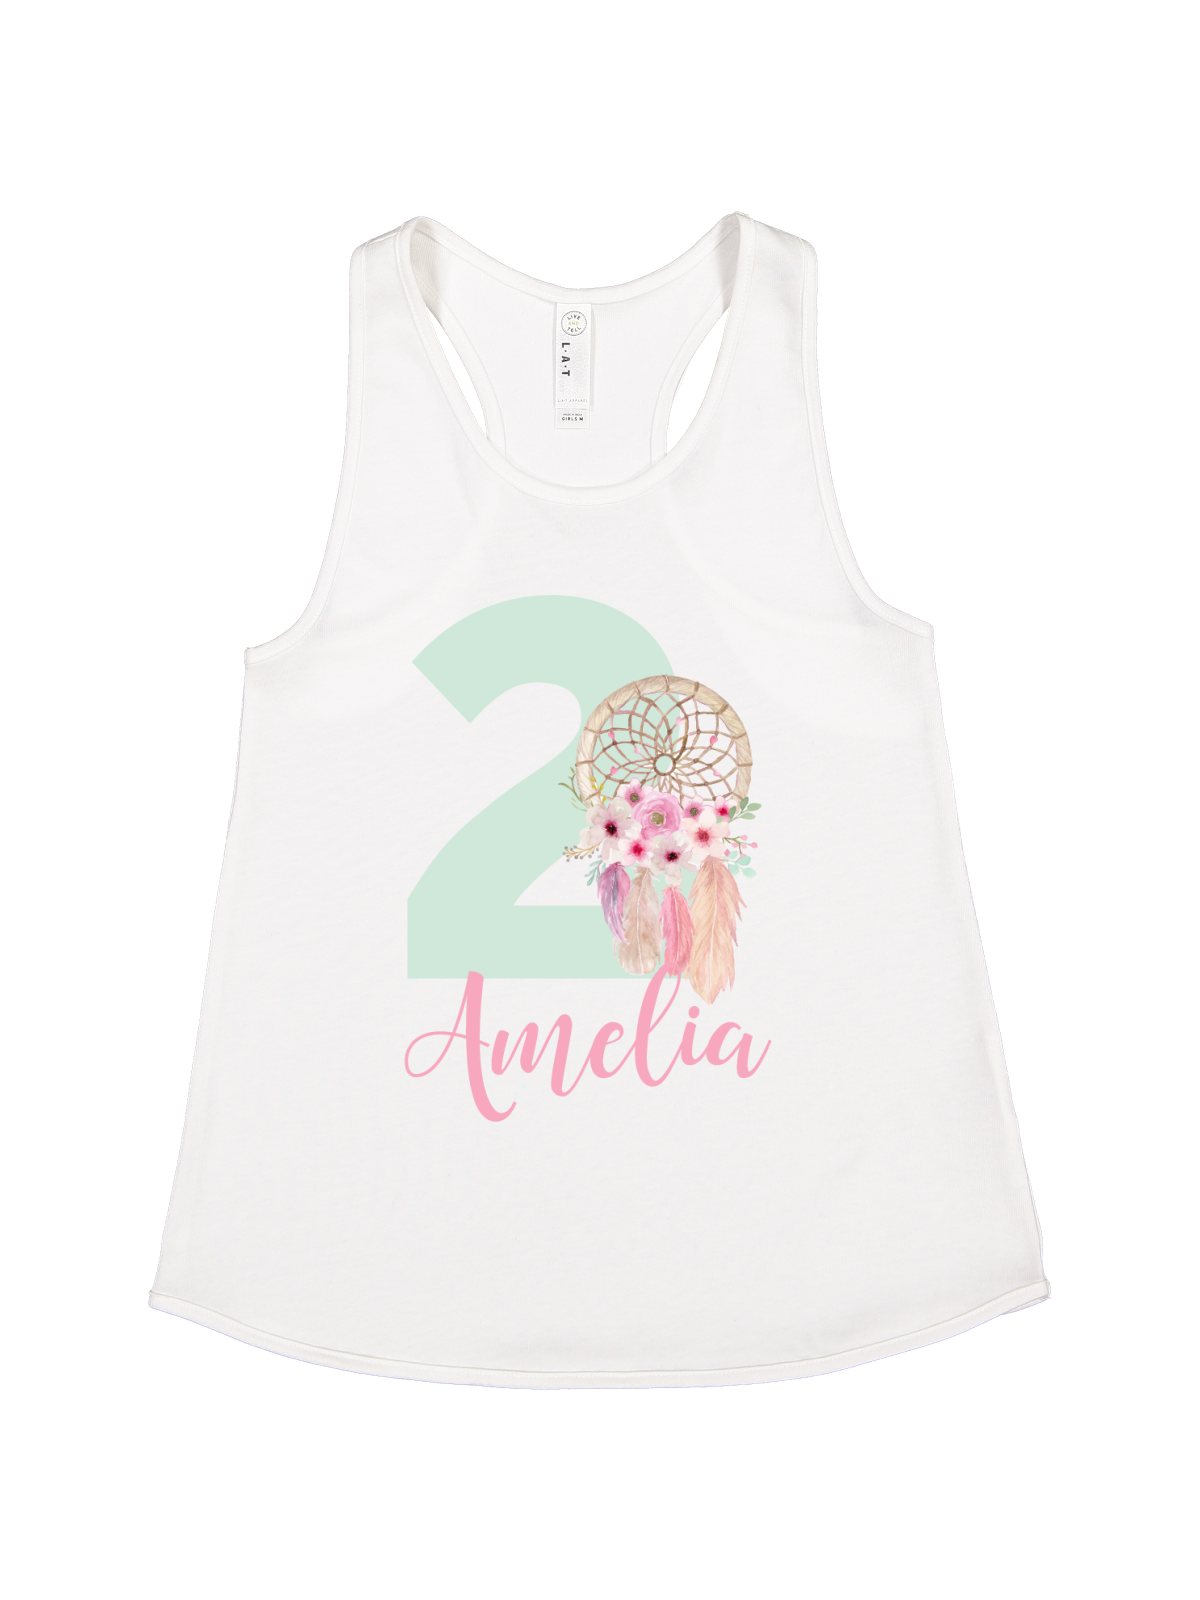 personalized dreamcatcher tank top